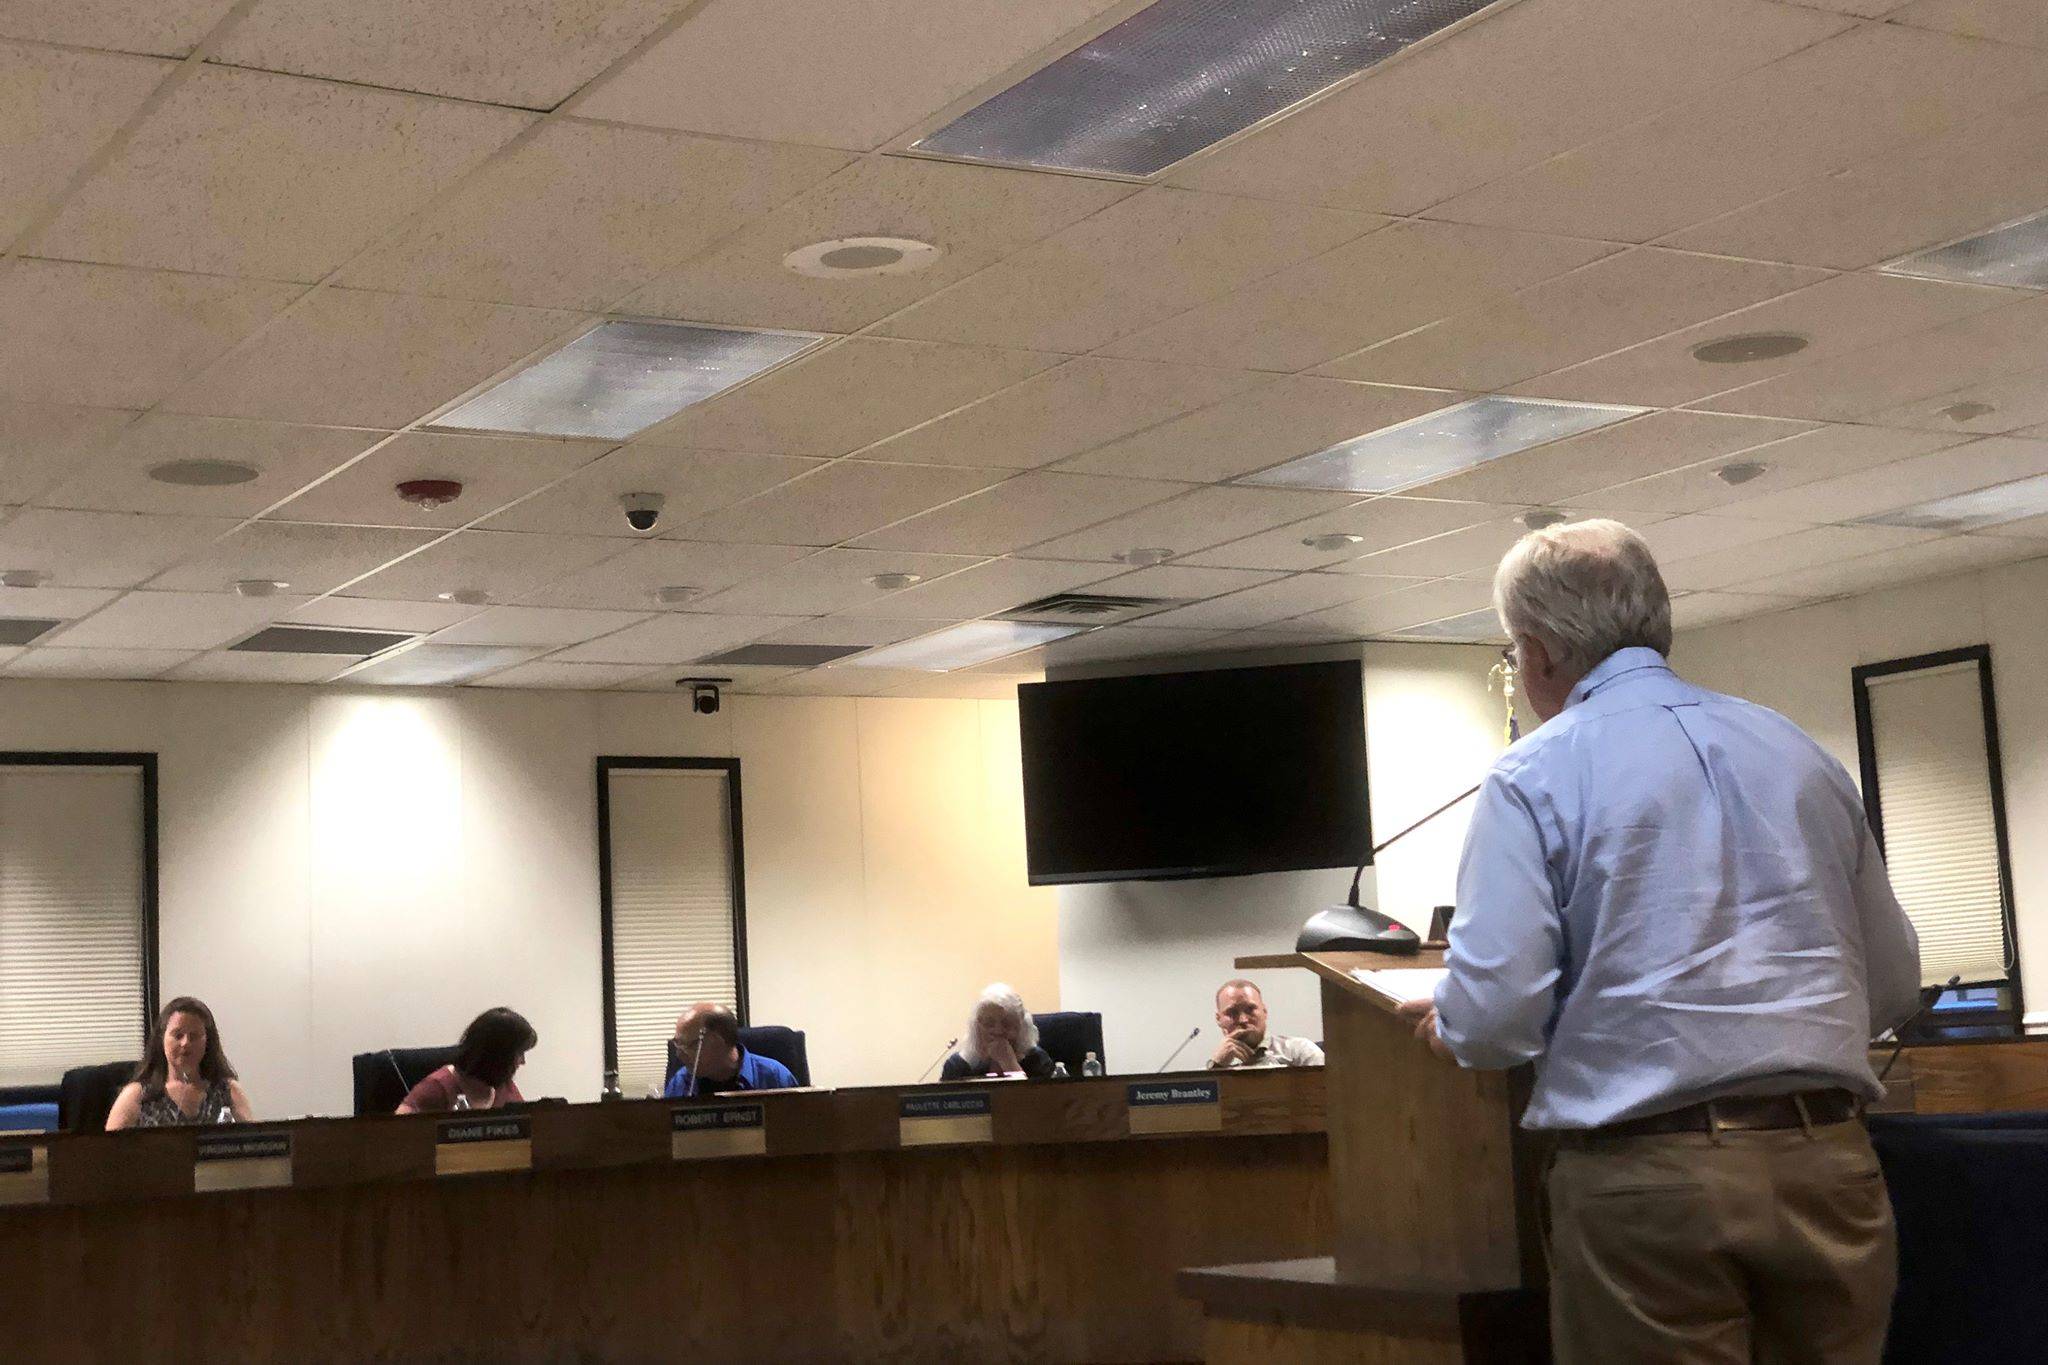 Country singer Zac Brown’s lawyer Blaine Gillam speaks for his client at the Kenai Peninsula Borough Planning Commission meeting, Aug. 12, 2019, in Soldotna, Alaska. (Photo by Victoria Petersen/Peninsula Clarion)